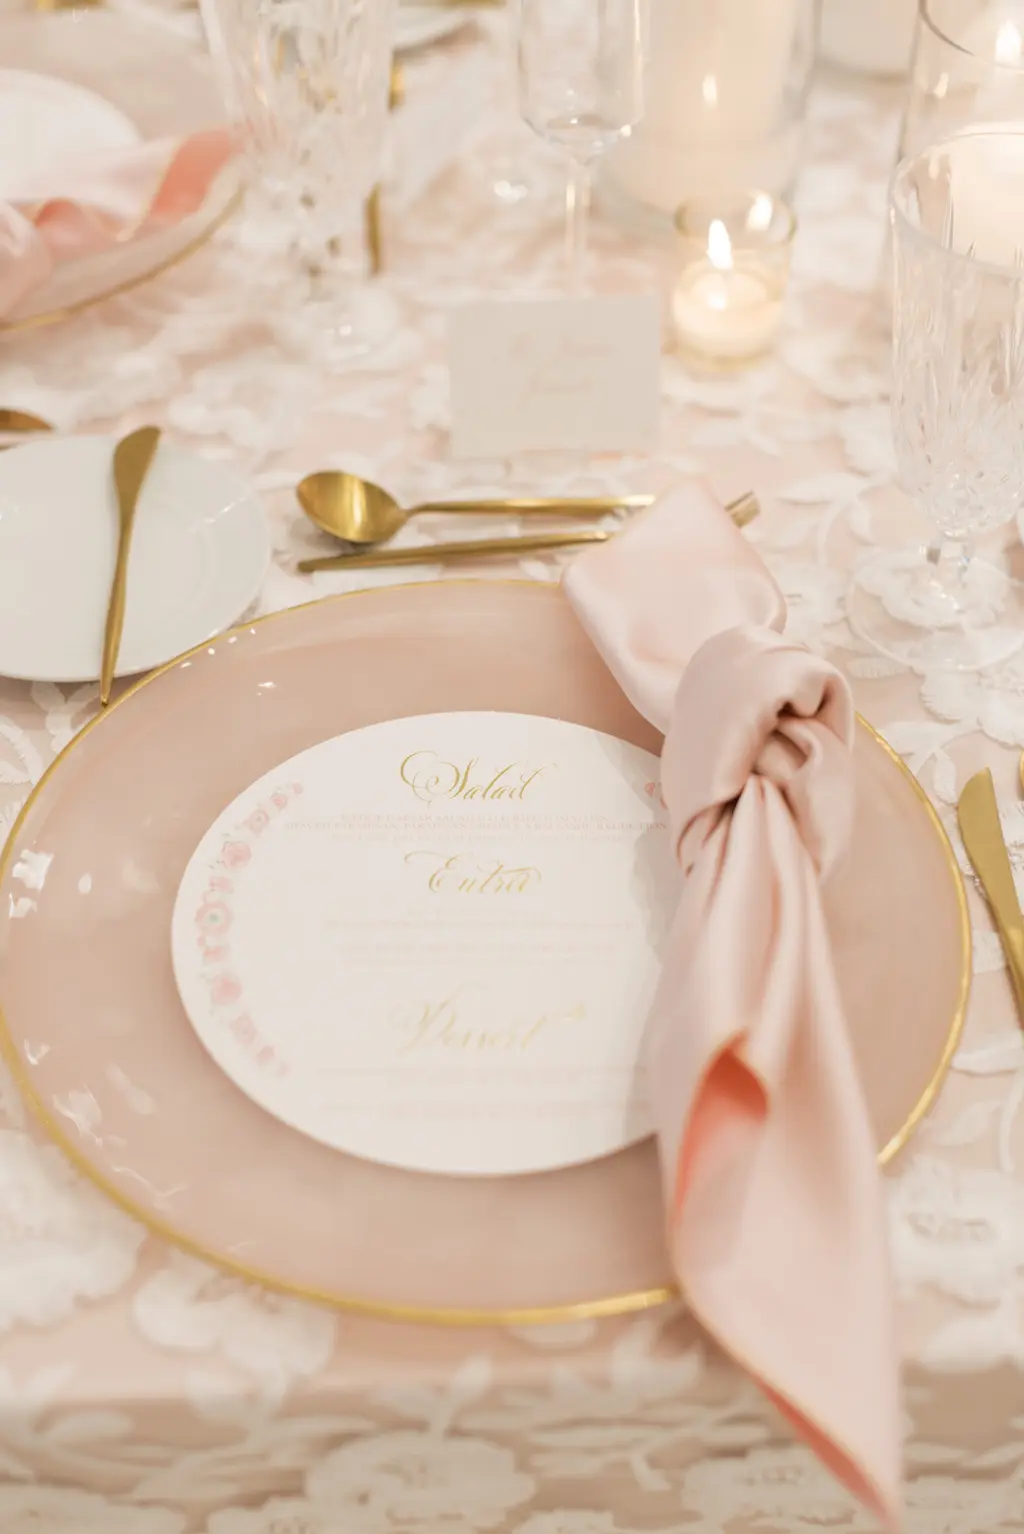 Pink Frosted Glass Chargers, Gold Flatware, and Individual Menu Cards | Vintage Pink Wedding Reception Table Setting Inspiration